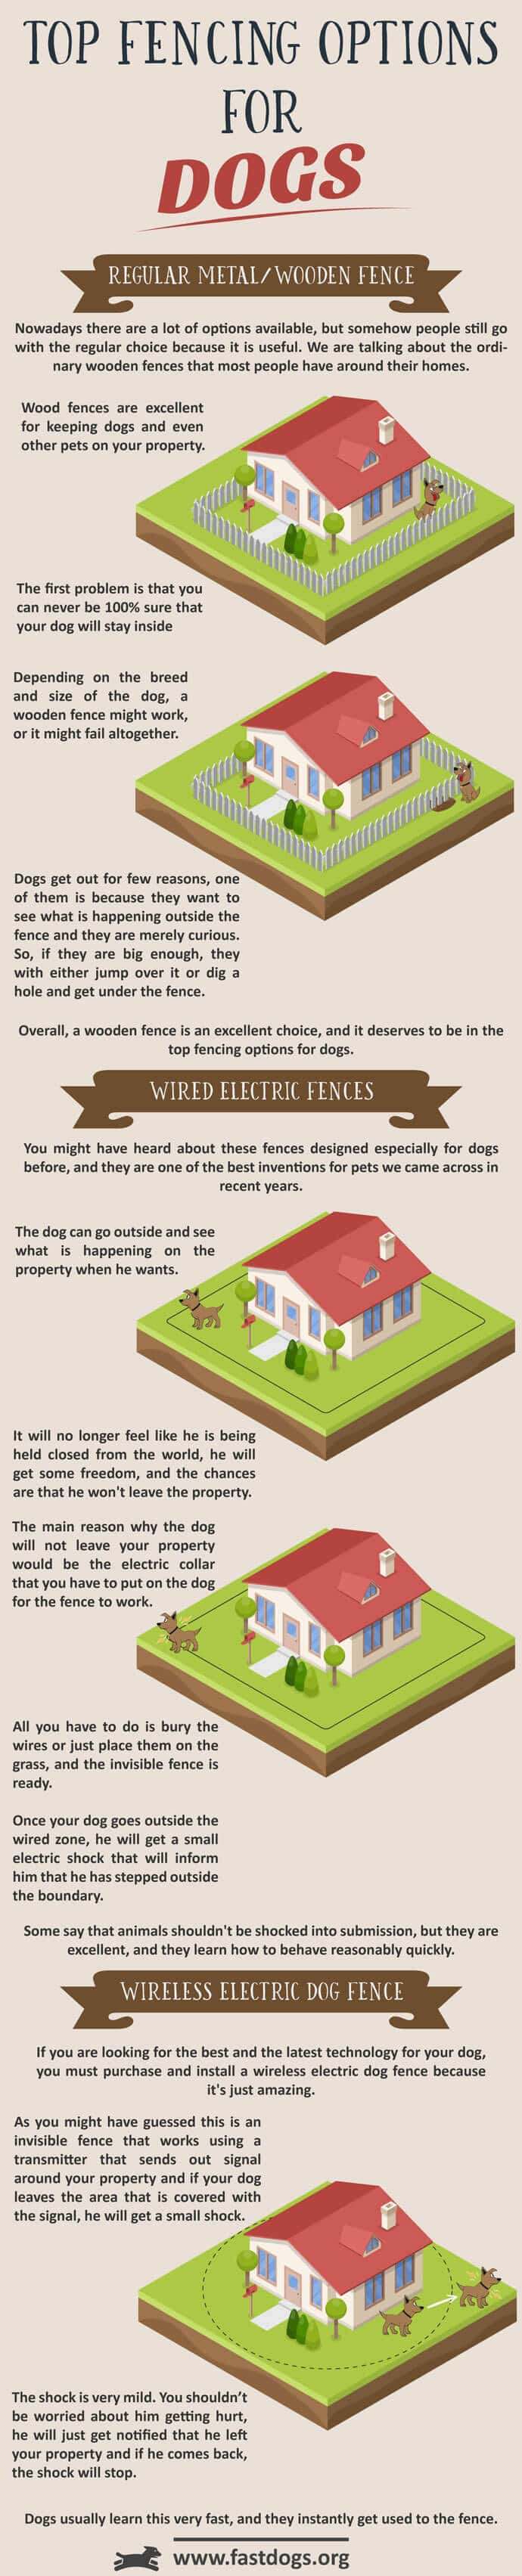 Top Fencing Options for Dogs Infographic